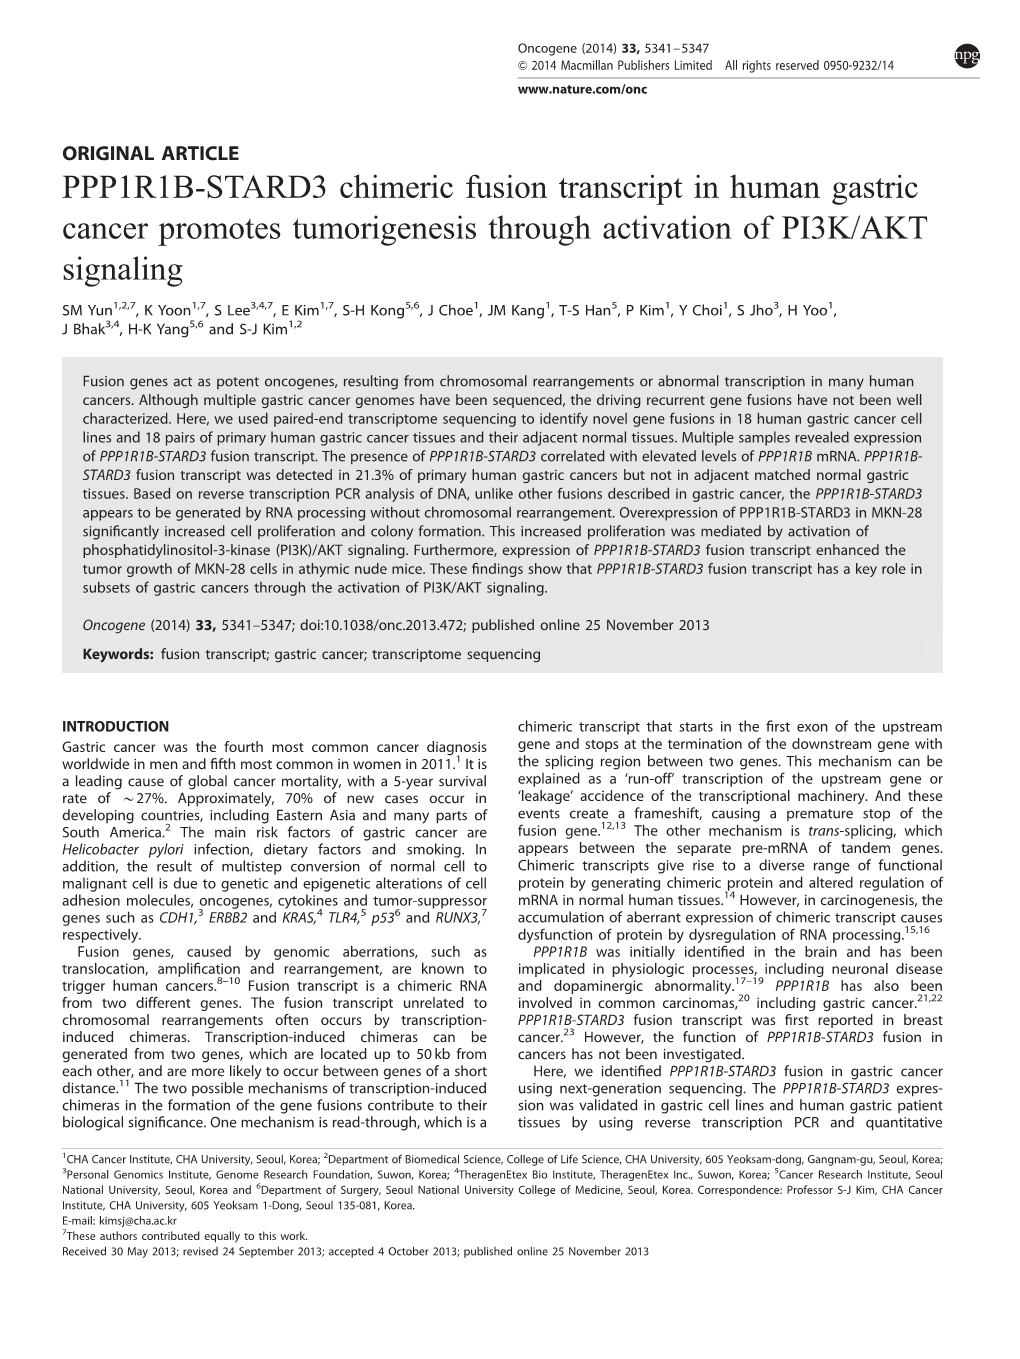 PPP1R1B-STARD3 Chimeric Fusion Transcript in Human Gastric Cancer Promotes Tumorigenesis Through Activation of PI3K/AKT Signaling